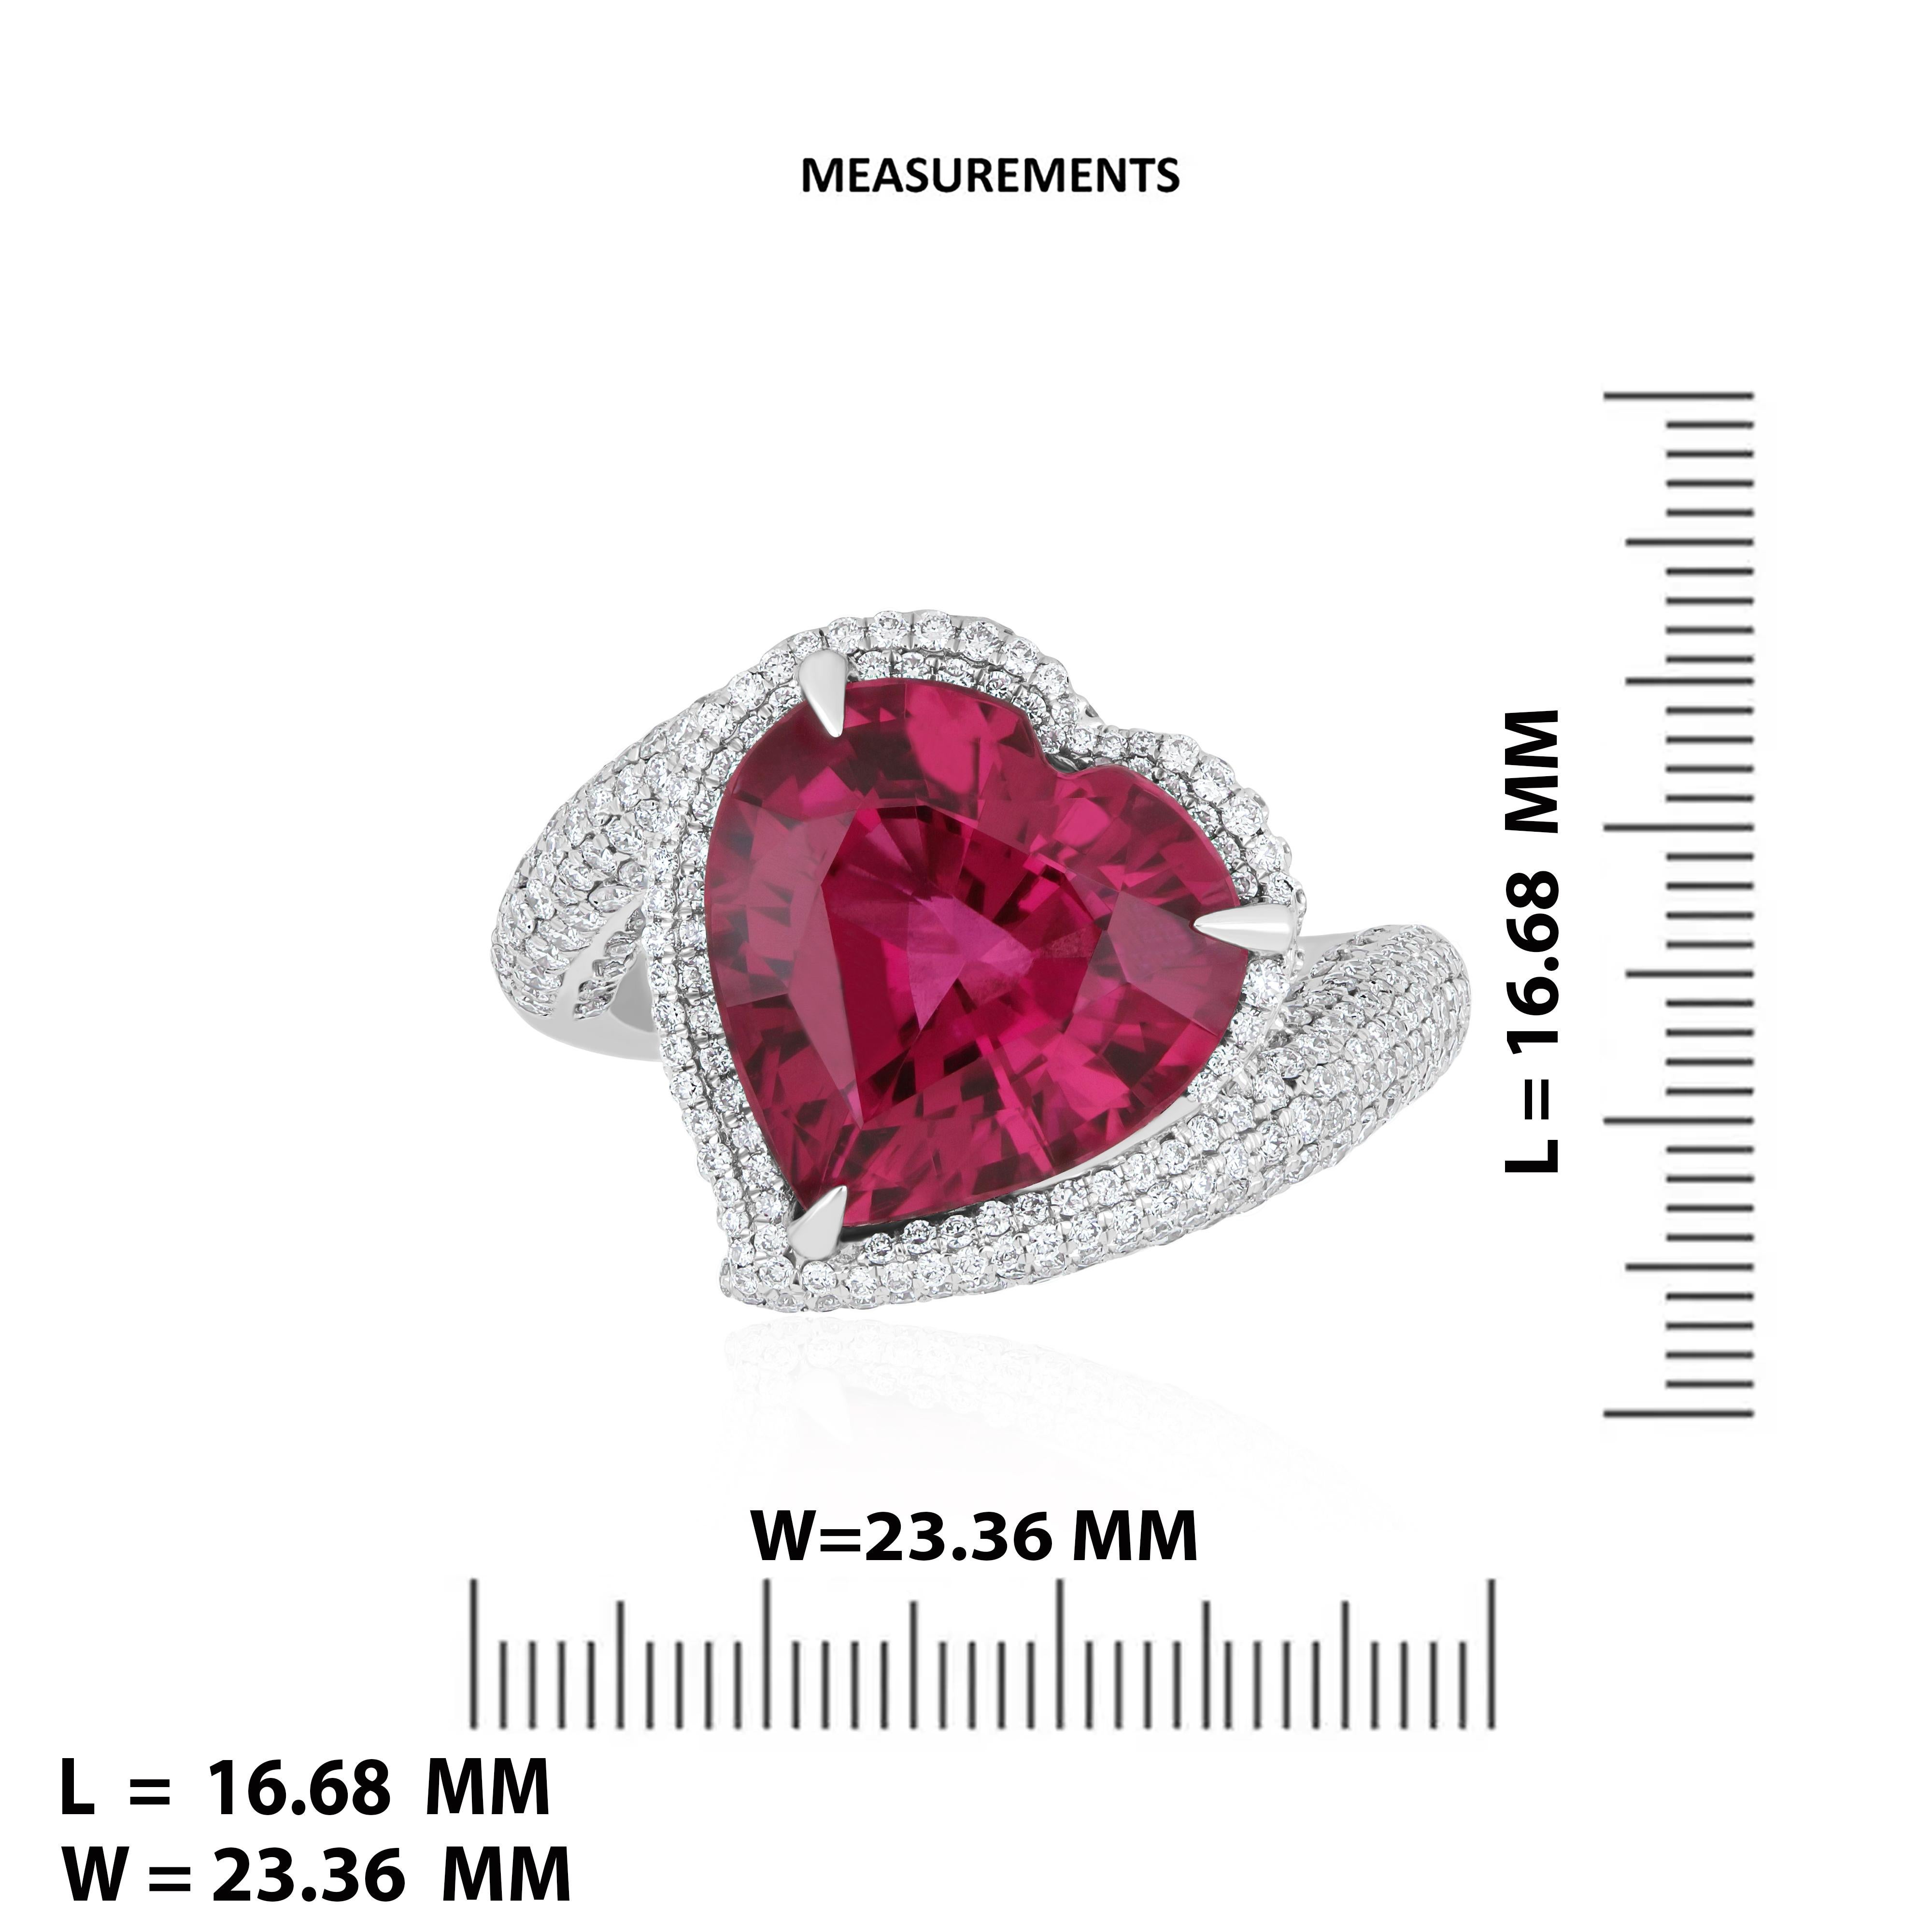 Elegant and exquisitely detailed 18K White Gold Ring, with 6.8 Cts Heart Shape Rubellite set in center and Surrounded by Micro pave Diamonds, weighing approx. 1.1 CT's. total carat weight to further enhance the beauty of the ring. Beautifully Hand